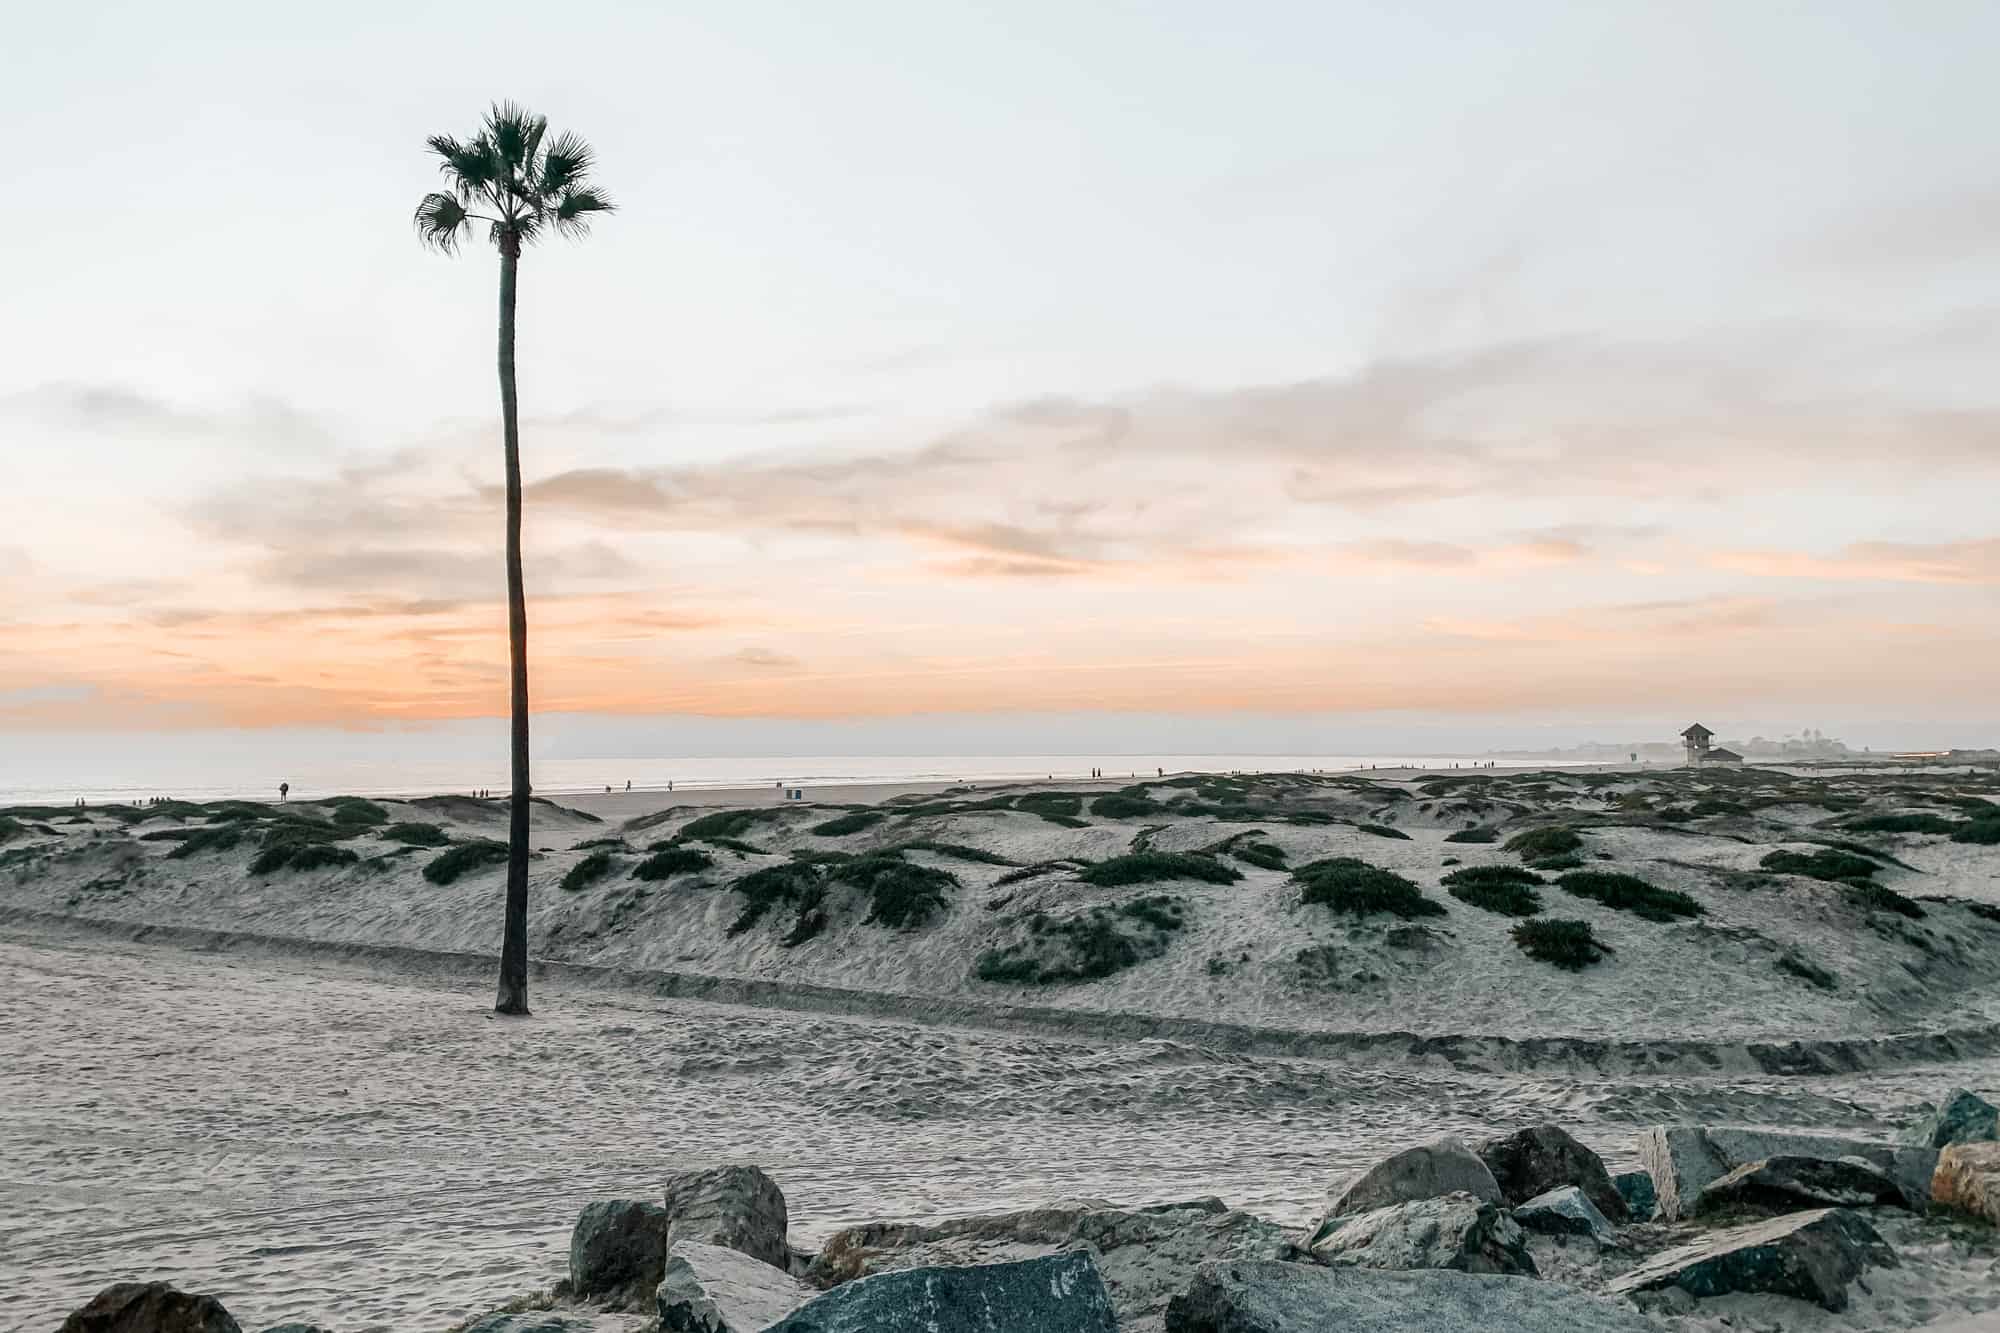 coronado beach at sunset with one lone palm tree, this is the closest beach to tucson located in the US